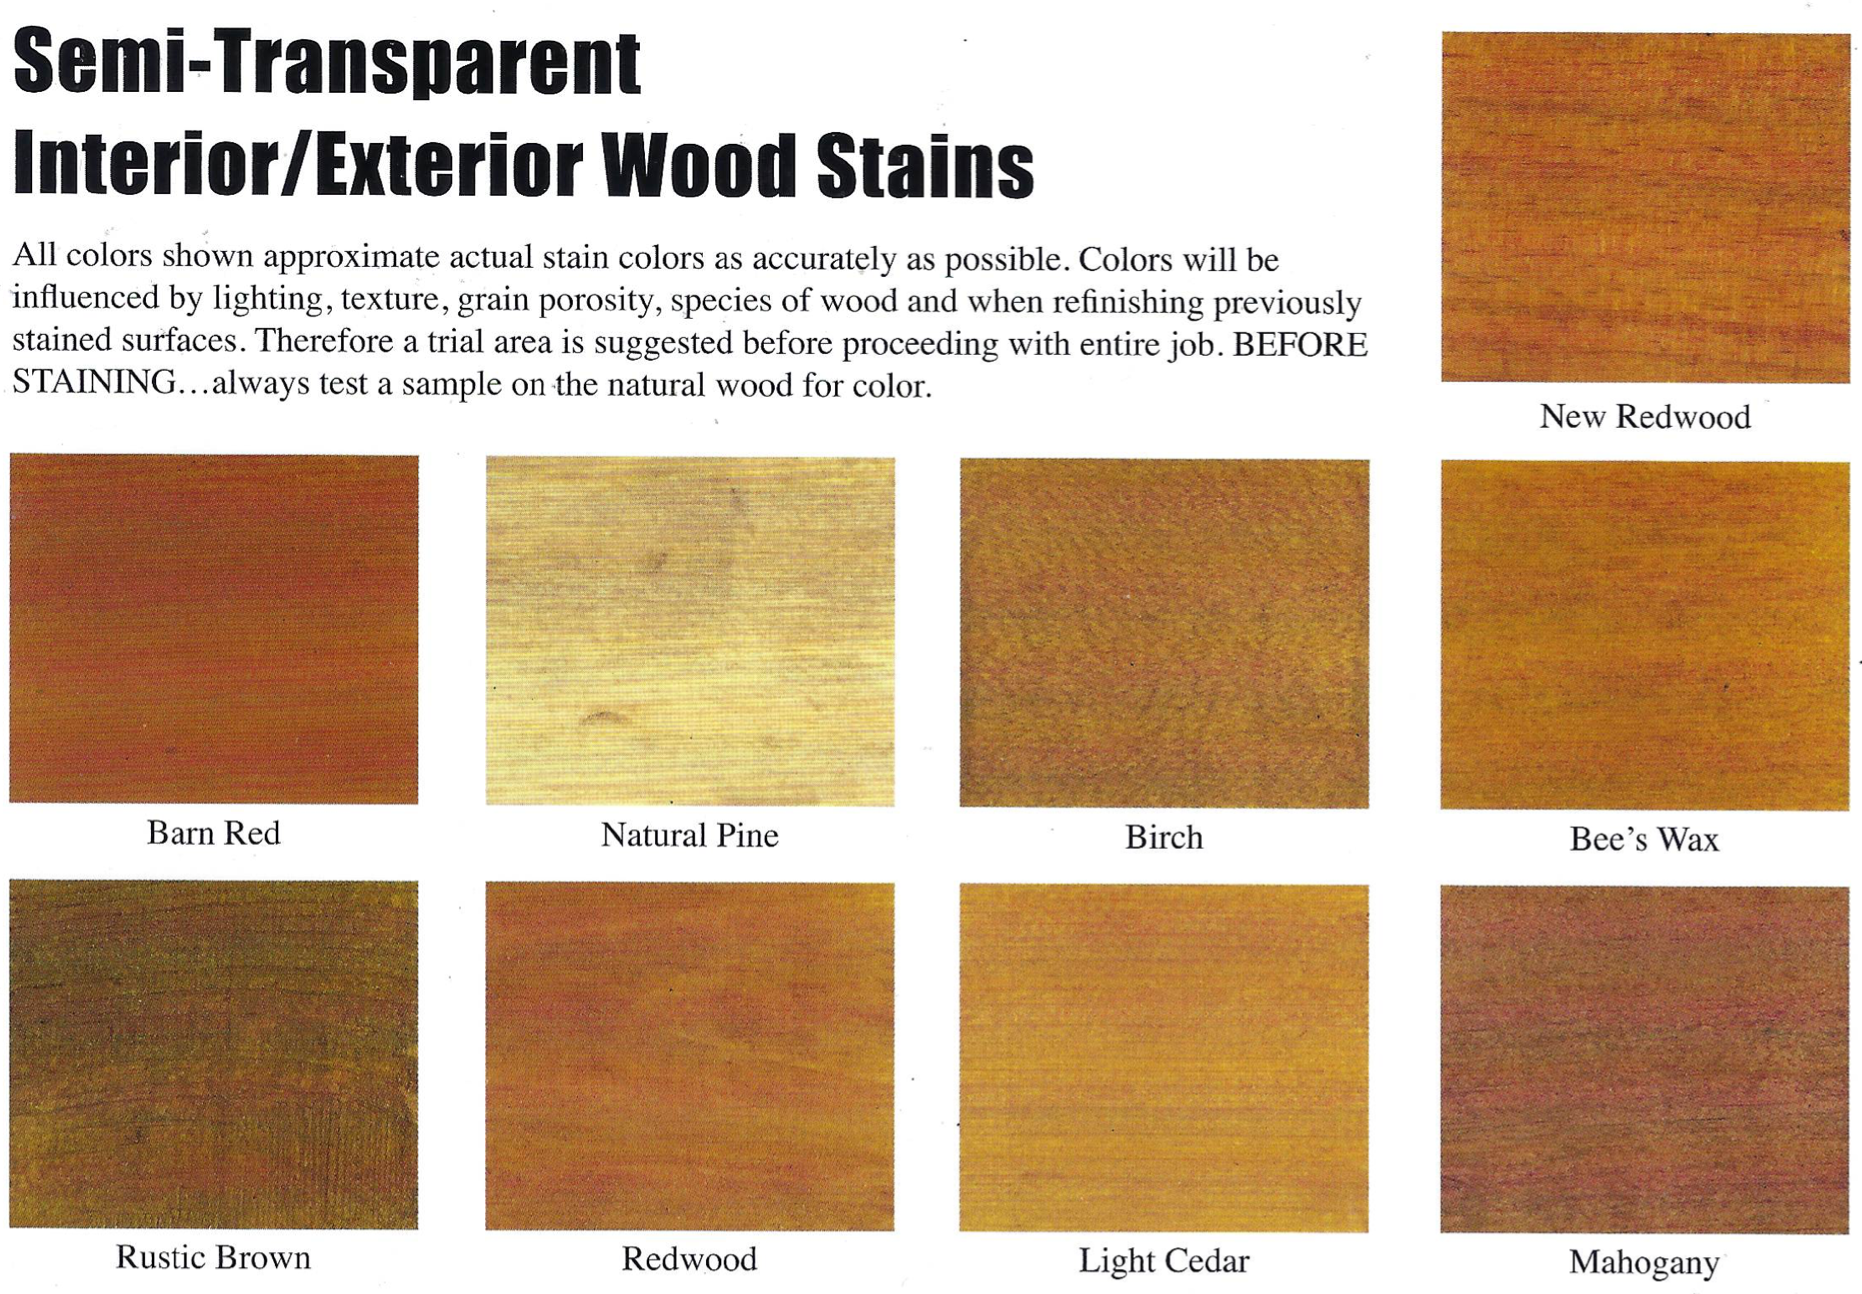 Natural-Kote Soy-Based Wood Stain 1 Gallon (Great for Bed Swing) / Deep Ebony